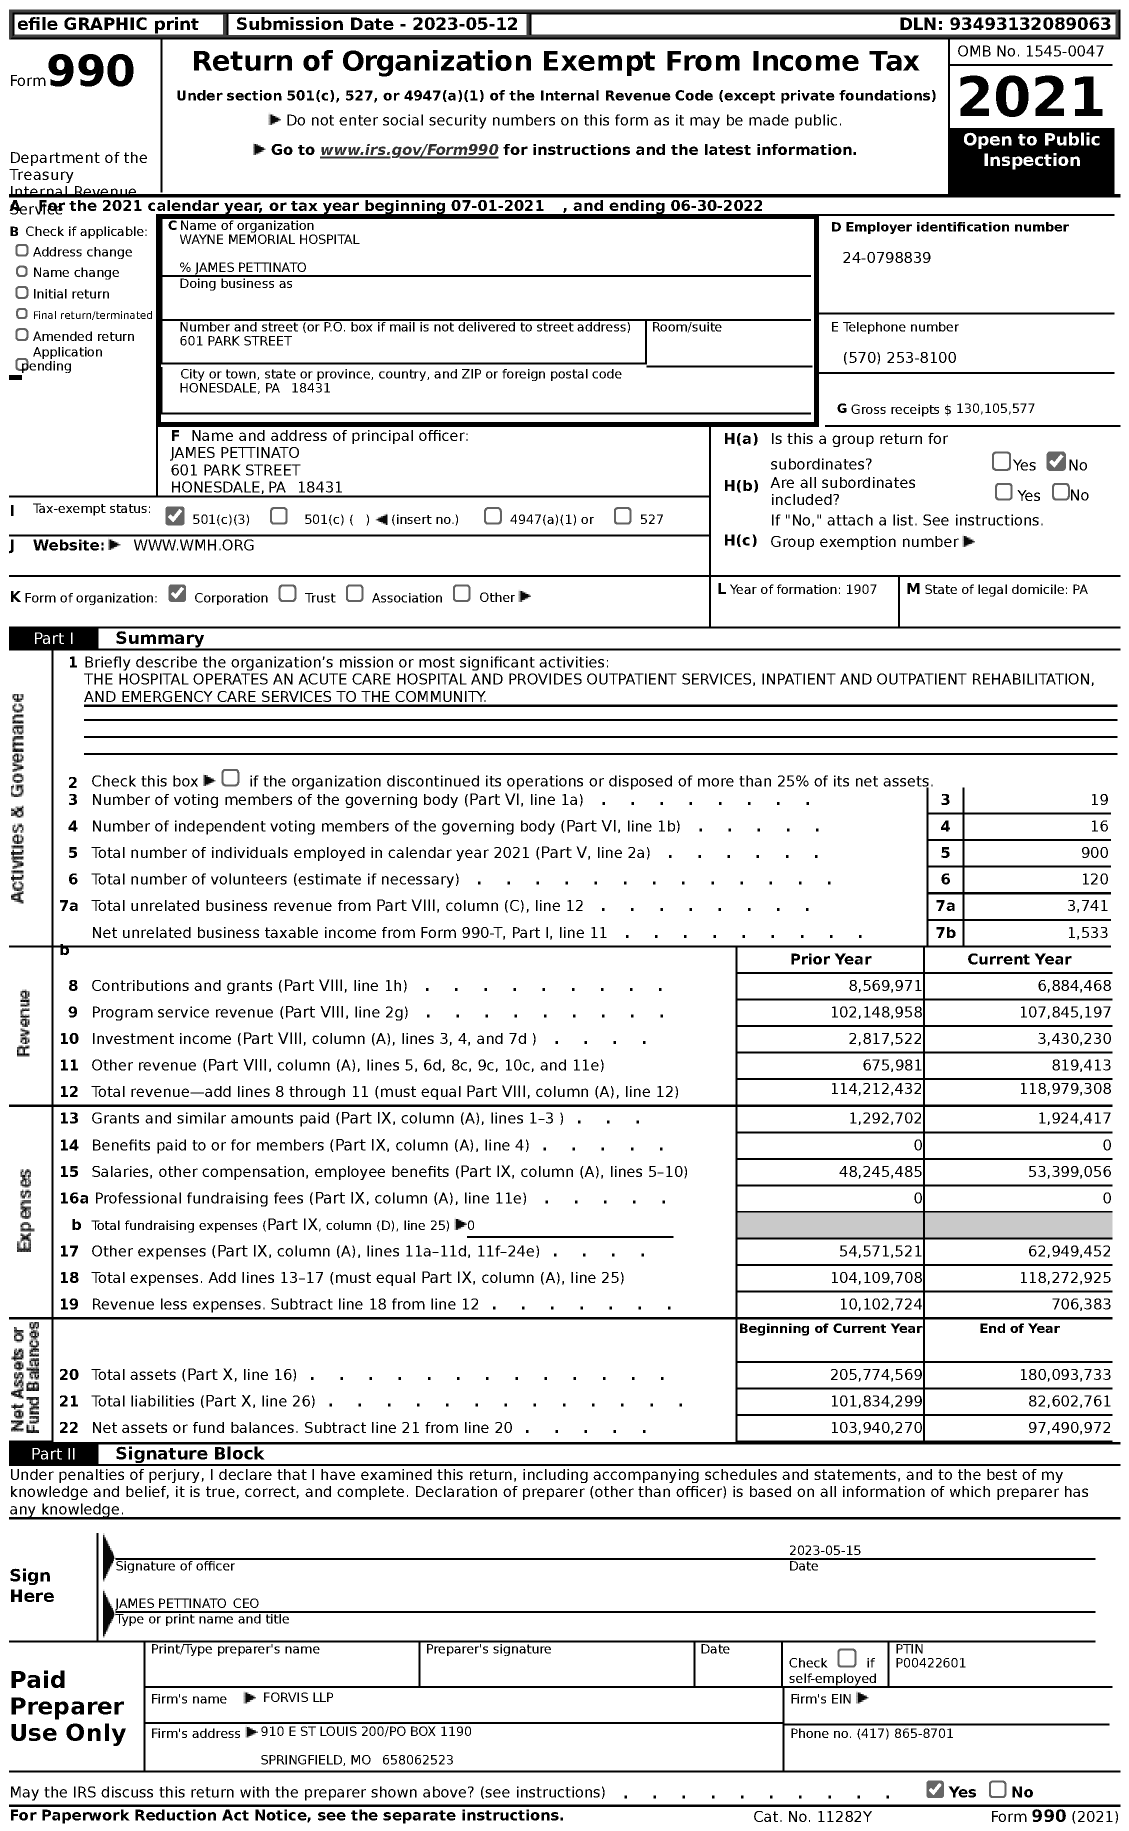 Image of first page of 2021 Form 990 for Wayne Memorial Hospital (WMH)